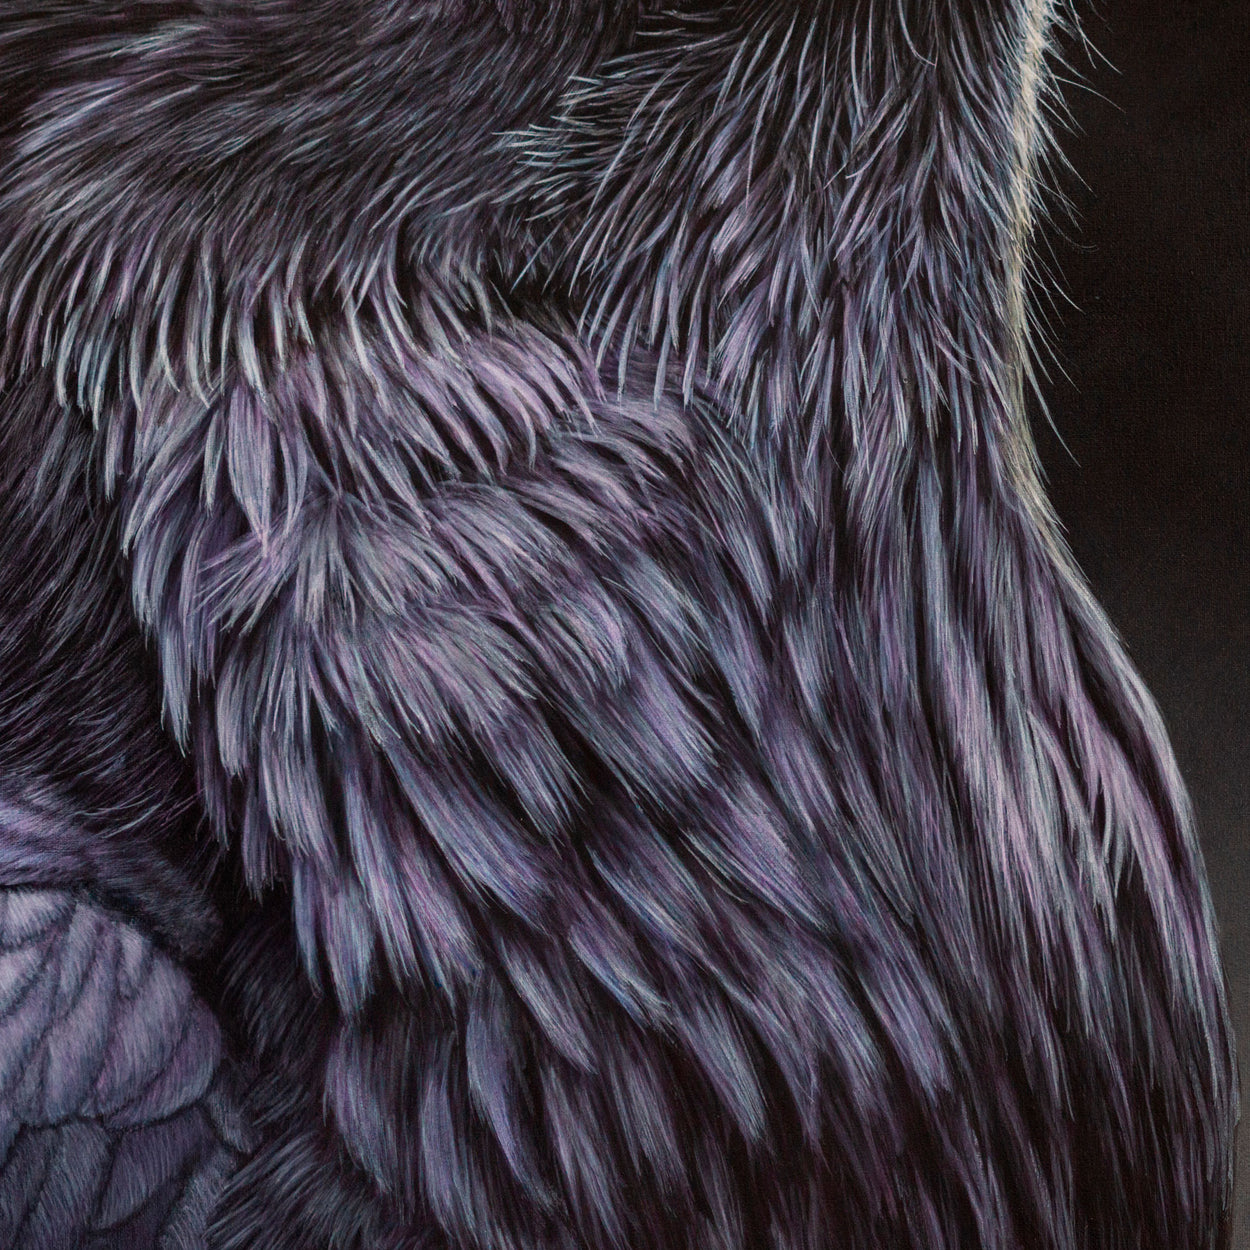 Raven painting close-up 3